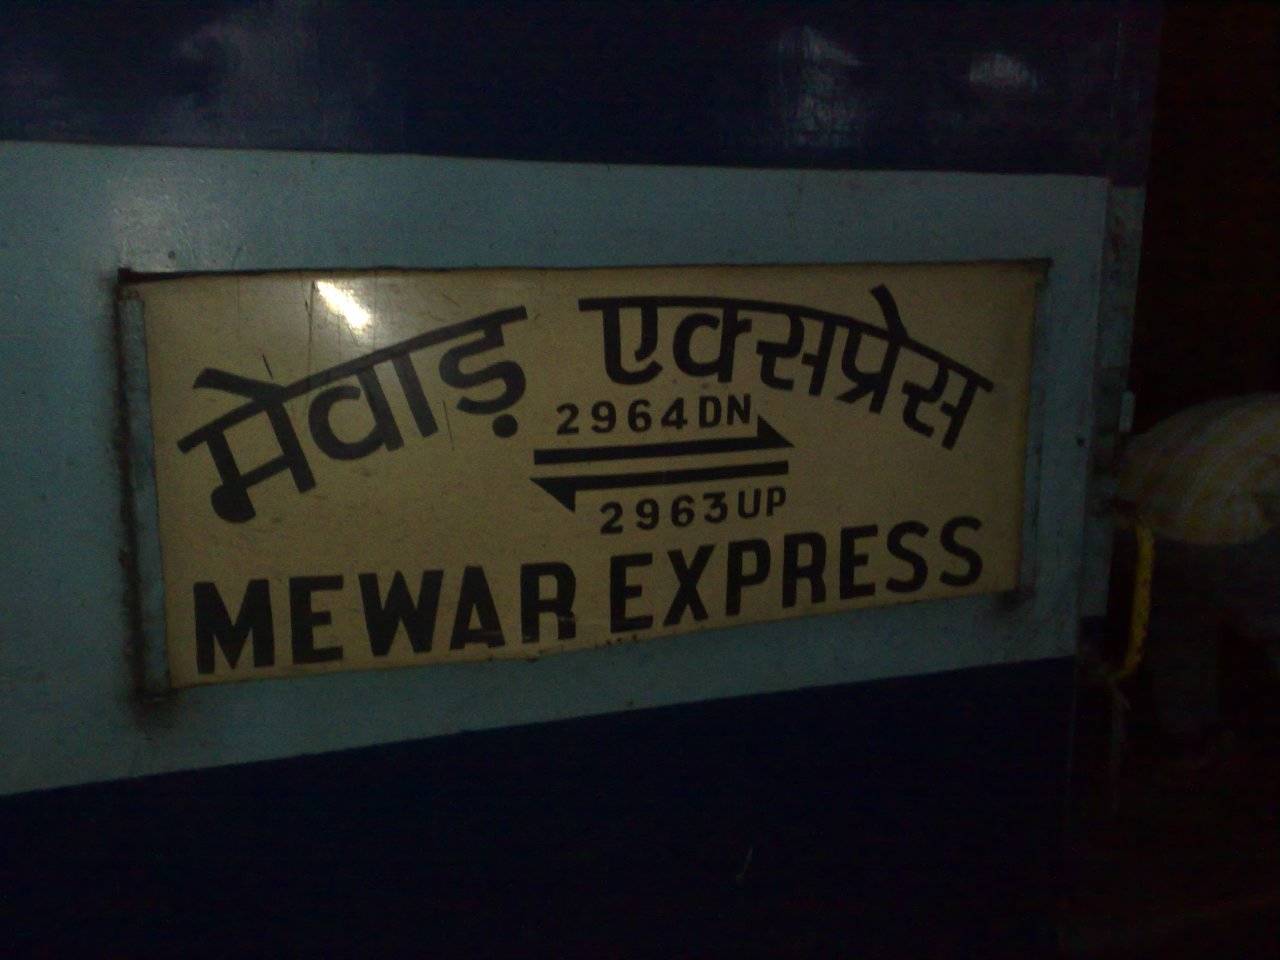 Schedule change for Mewar Express requested by MP CP Joshi